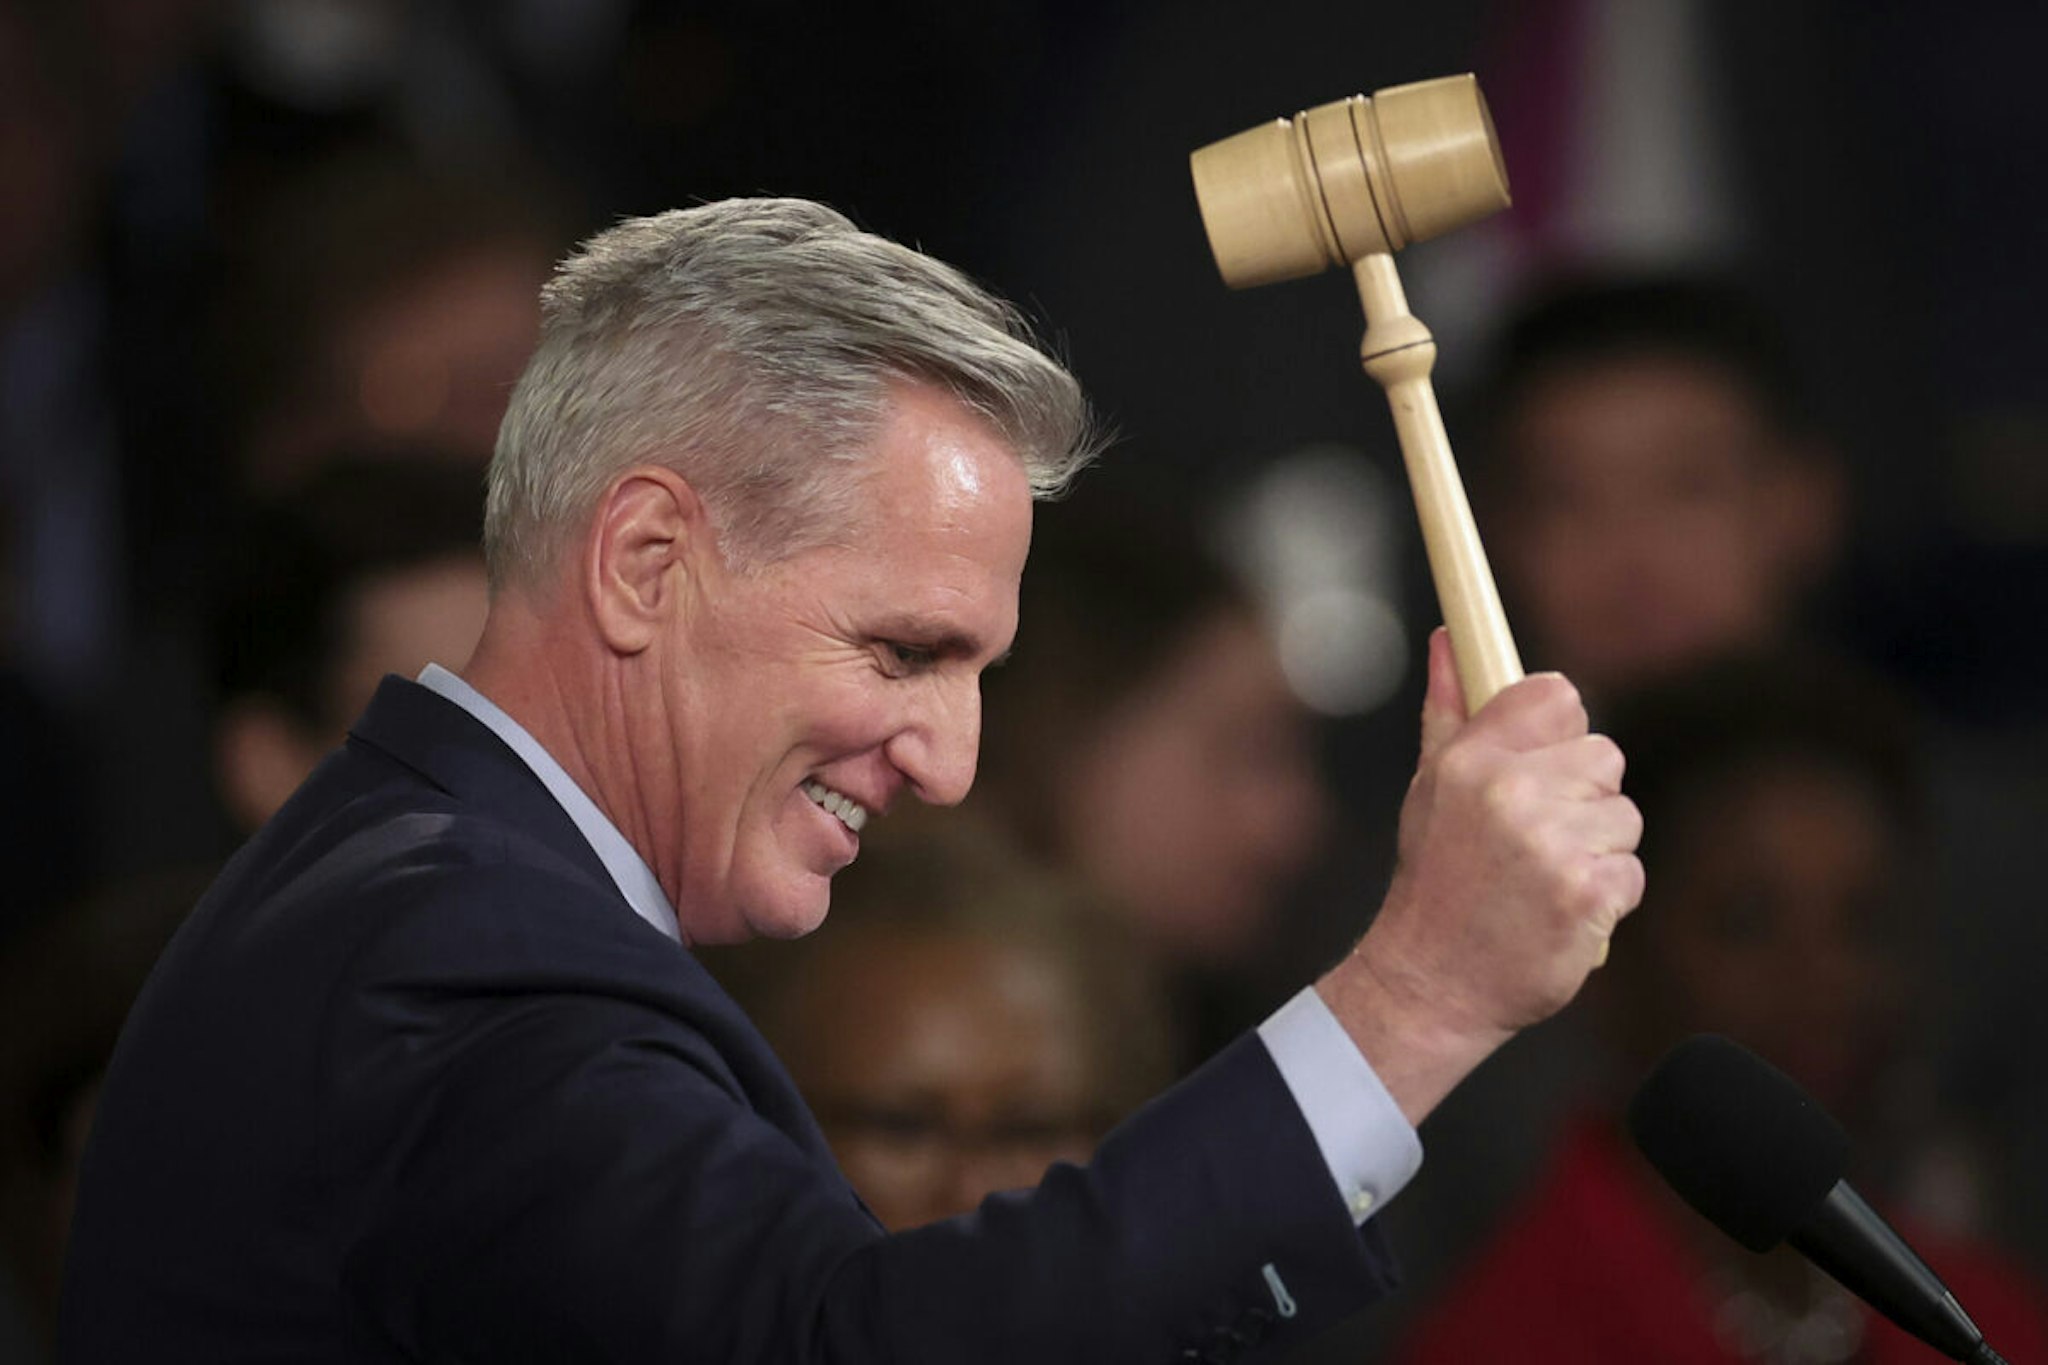 U.S. Speaker of the House Kevin McCarthy (R-CA) celebrates while holding the Speaker's gavel after being elected as Speaker in the House at the U.S. Capitol on January 07, 2023 in Washington, DC.